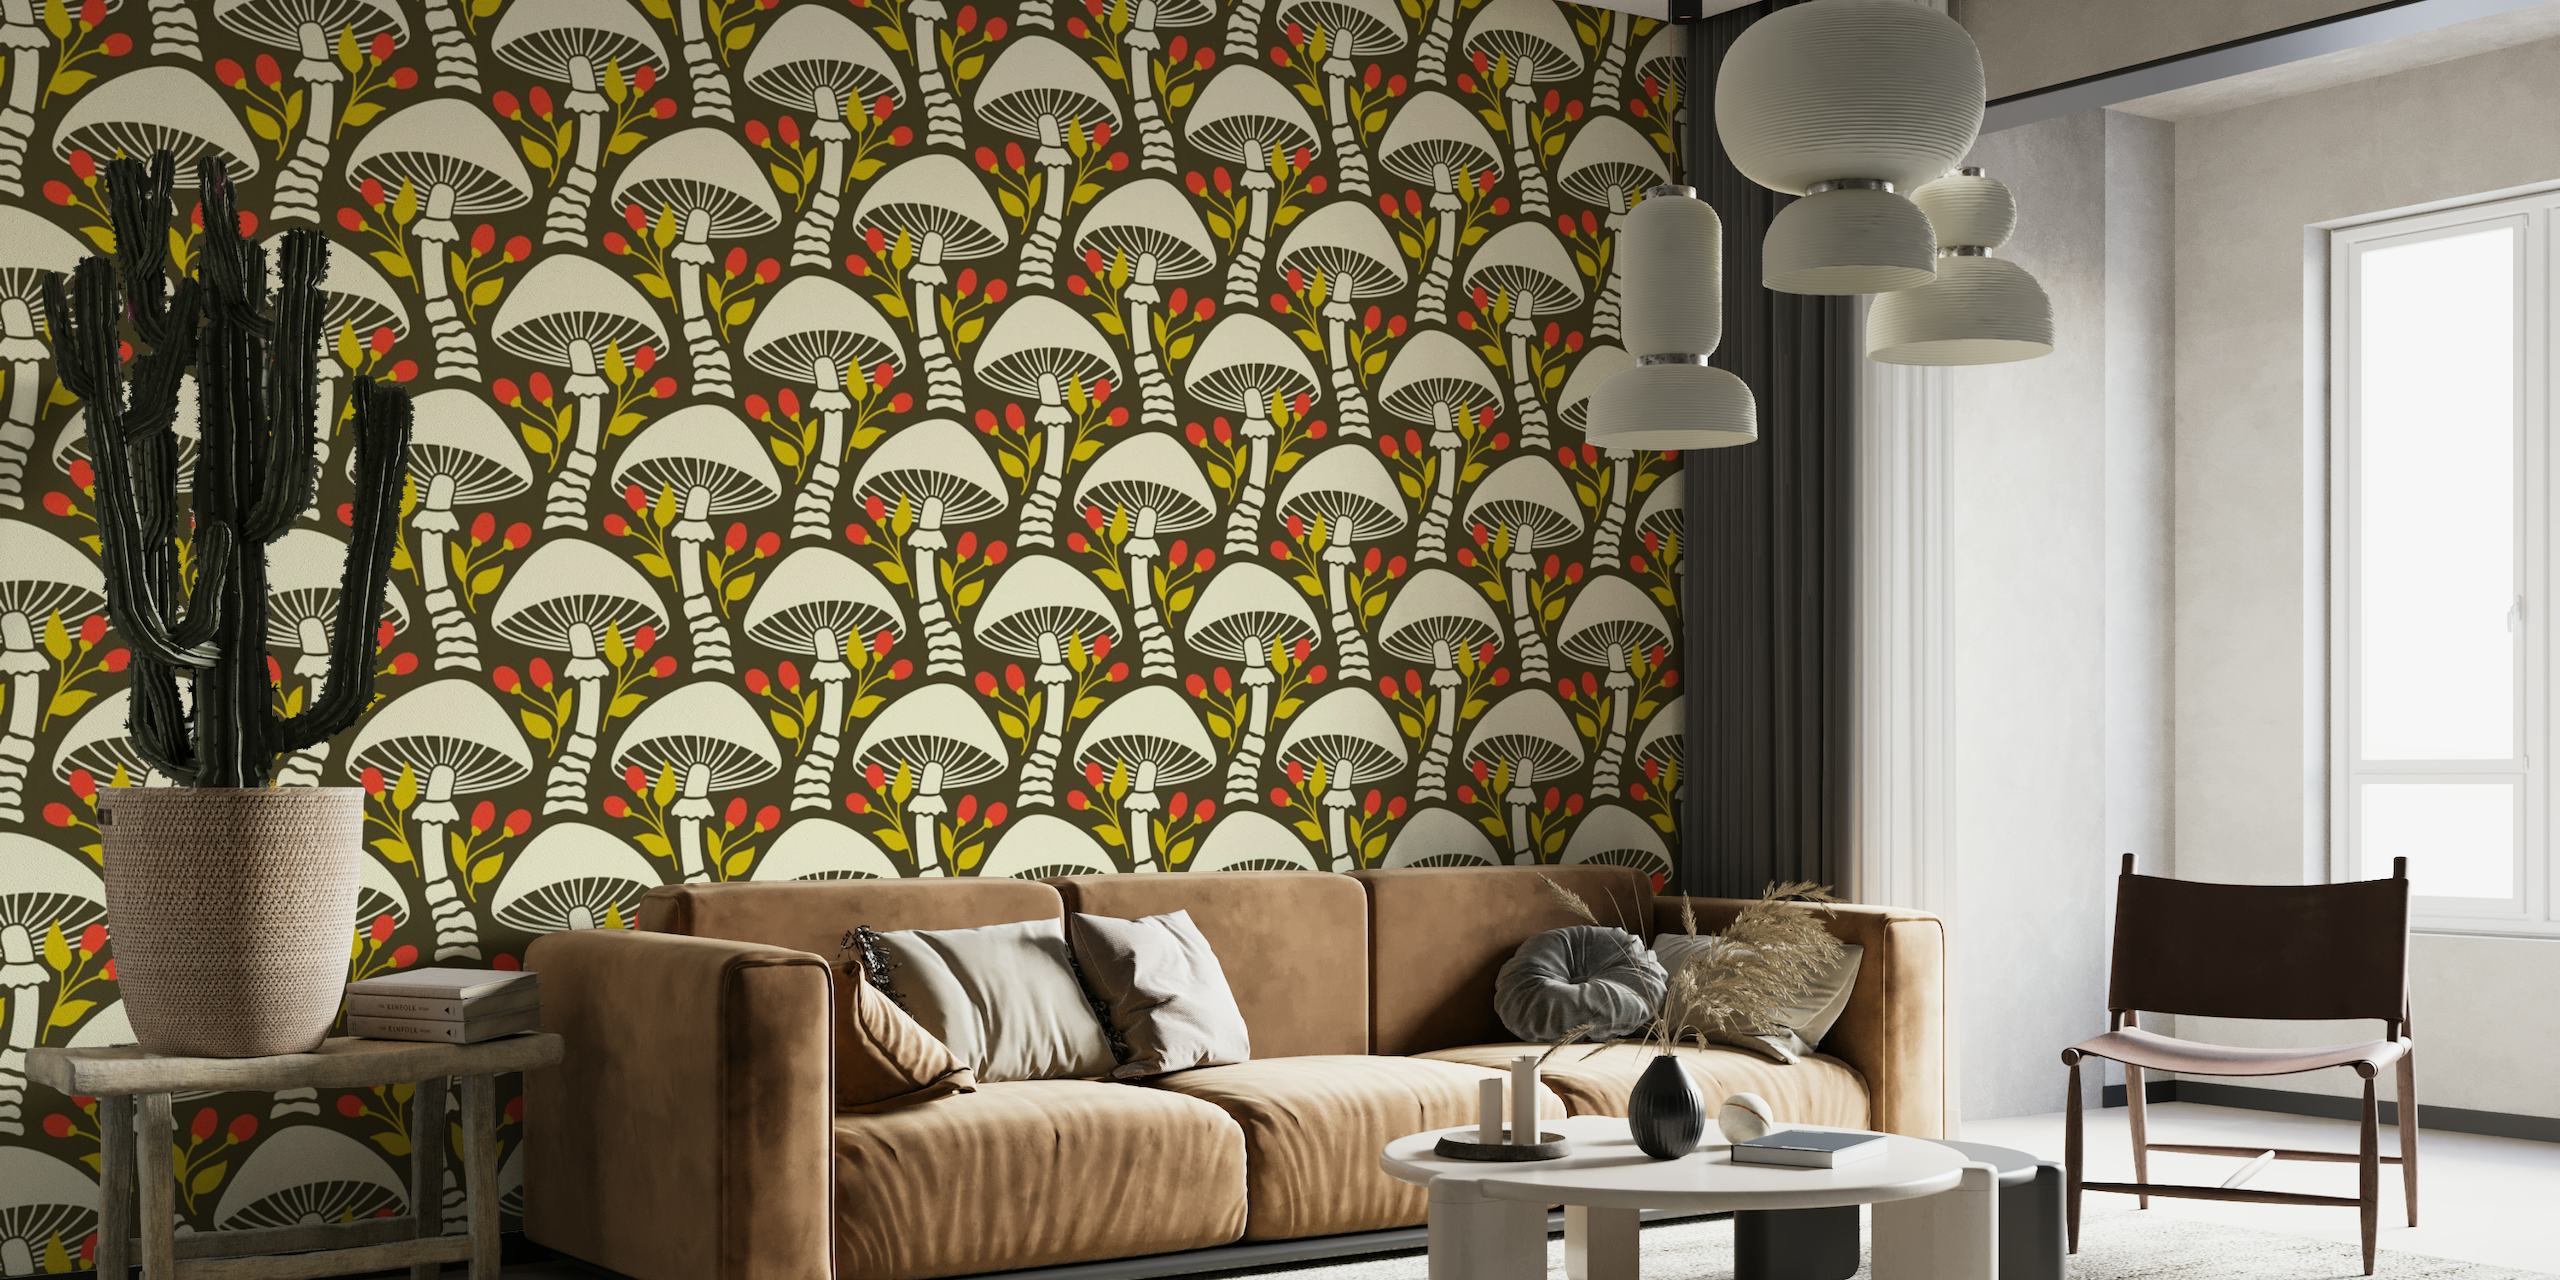 Stylized white mushrooms and red berries on a brown background wall mural